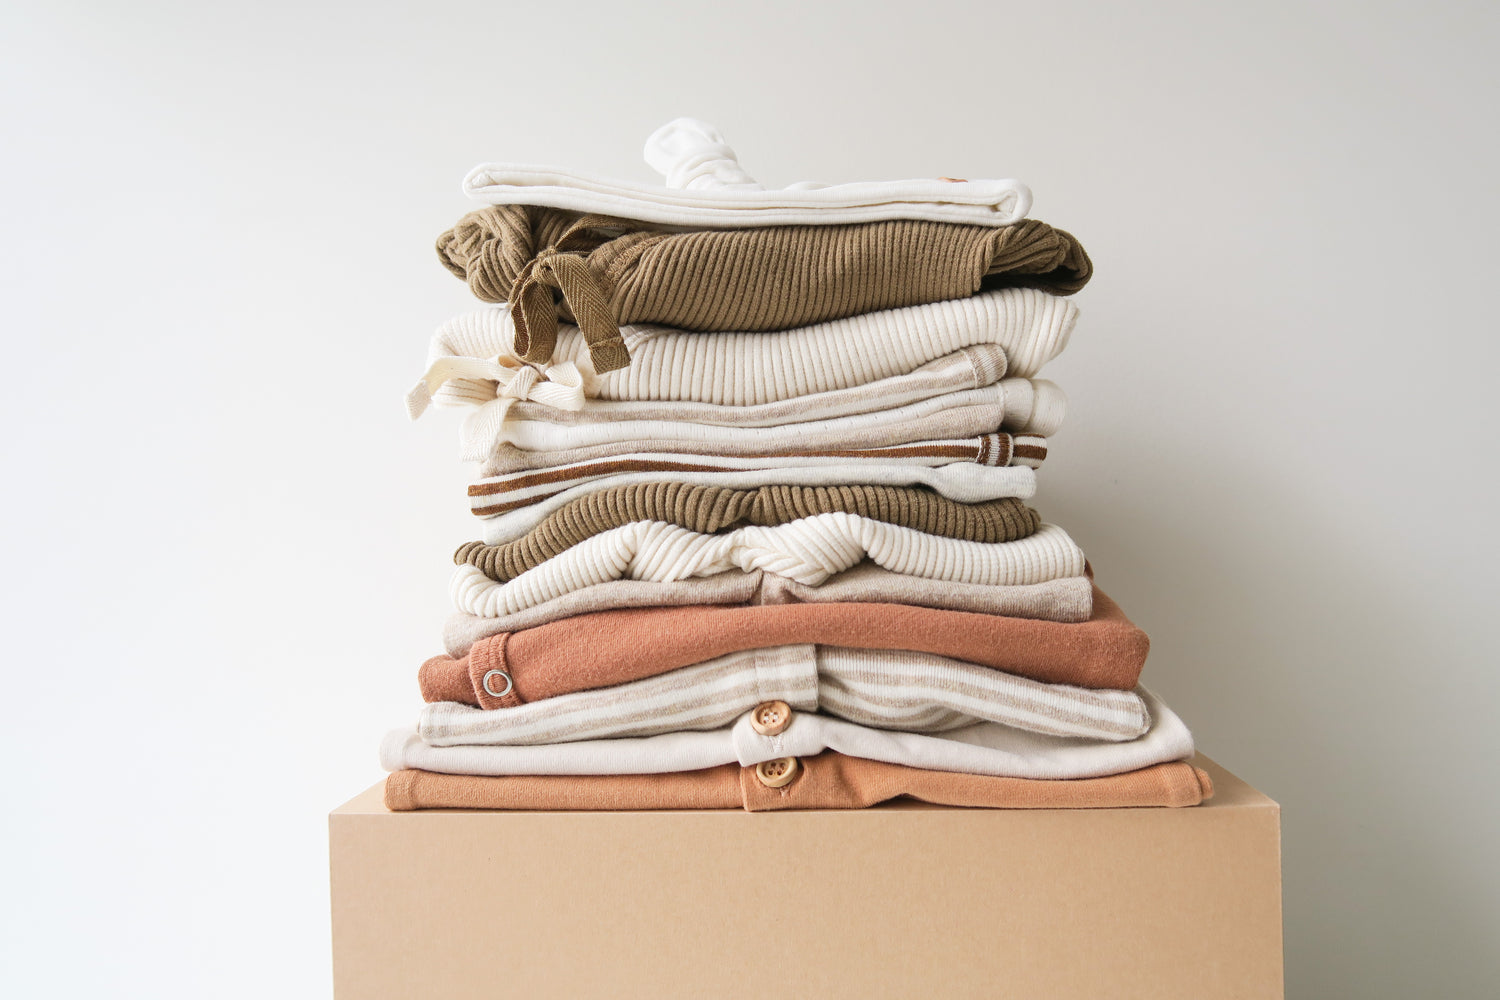 Pile of folded organic cotton baby clothes in brownish and light natural colors from OiOiOi. Bundle of baby clothes presented on a box